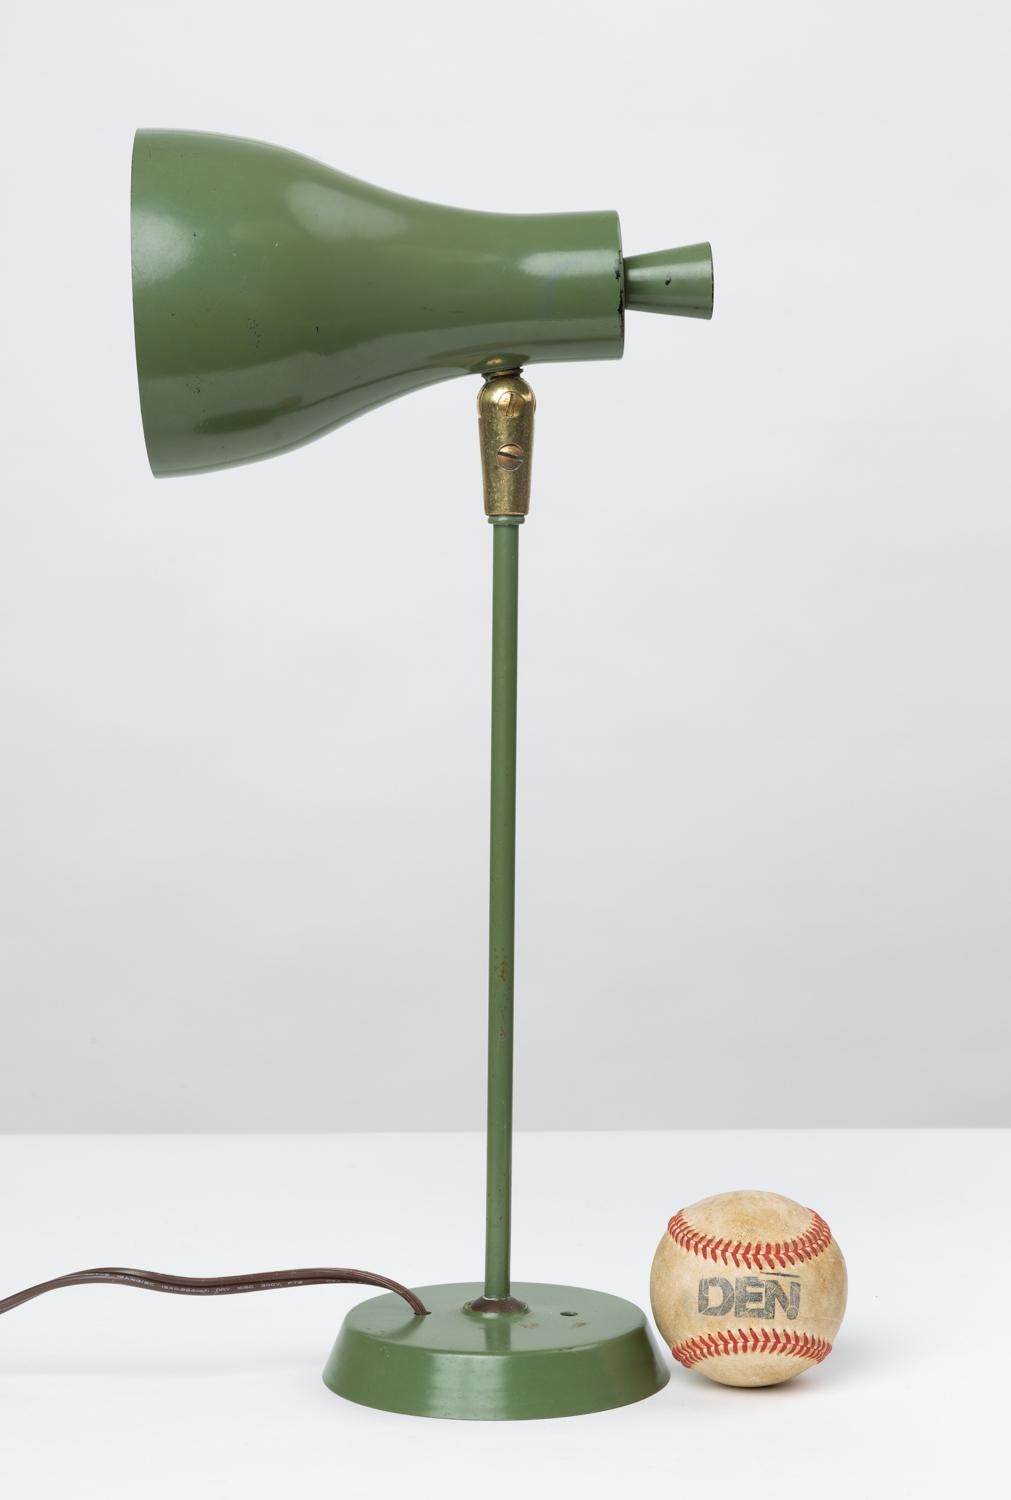 A small, wall-mounted lamp designed by Gerald Thurston for Lightolier. The piece has a tulip shade, an oversized on/off switch, and a plate mount in matching red-enameled metal. A brass joint allows the shade to rotate and extend.

Condition: